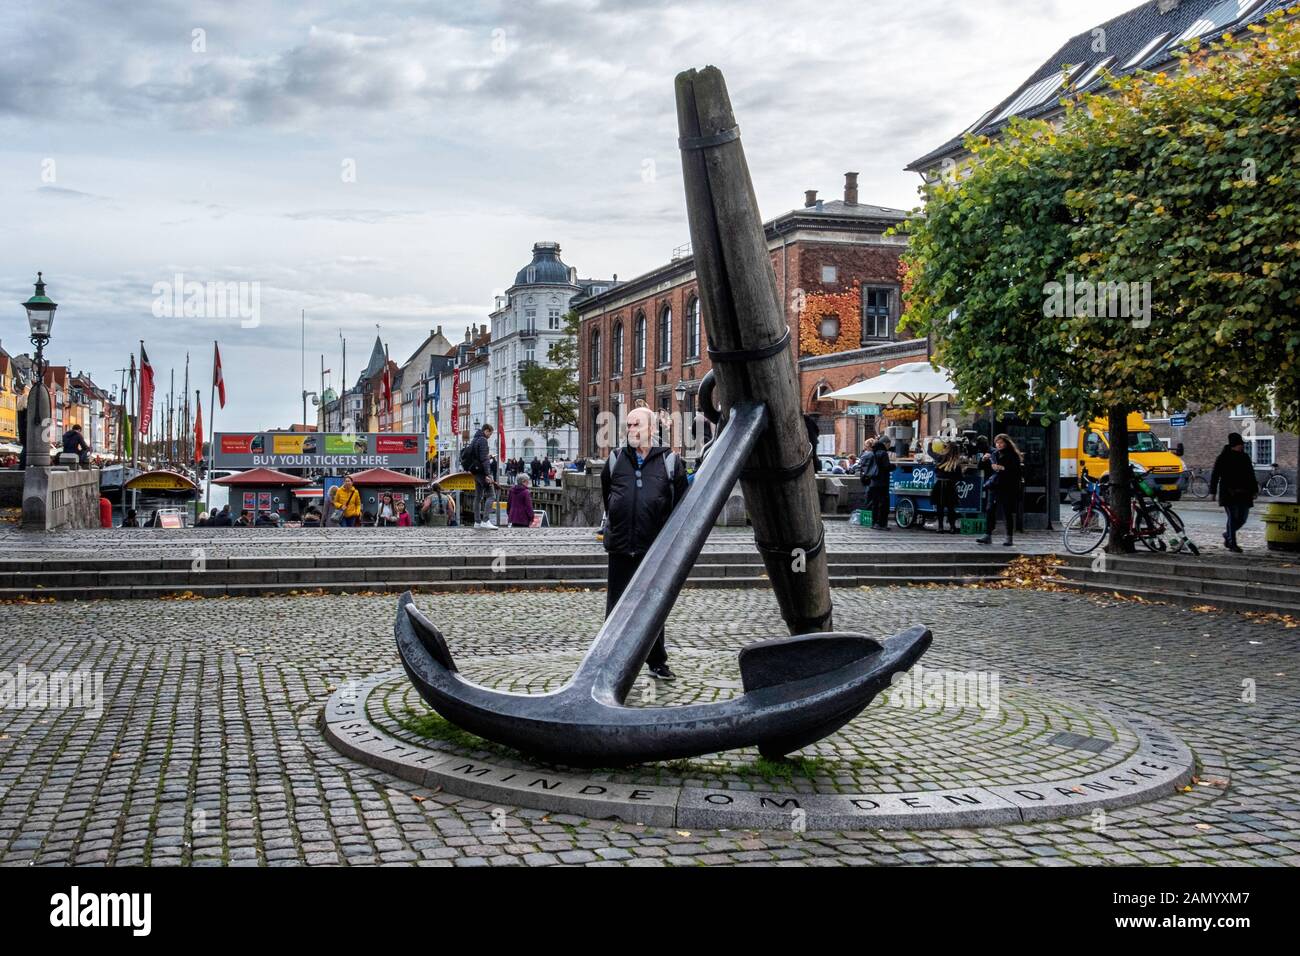 The Memorial Anchor - monument commemorating the more than 1,700 Danish officers and sailors who died during World War II, Nyhavn, Copenhagen, Denmark Stock Photo